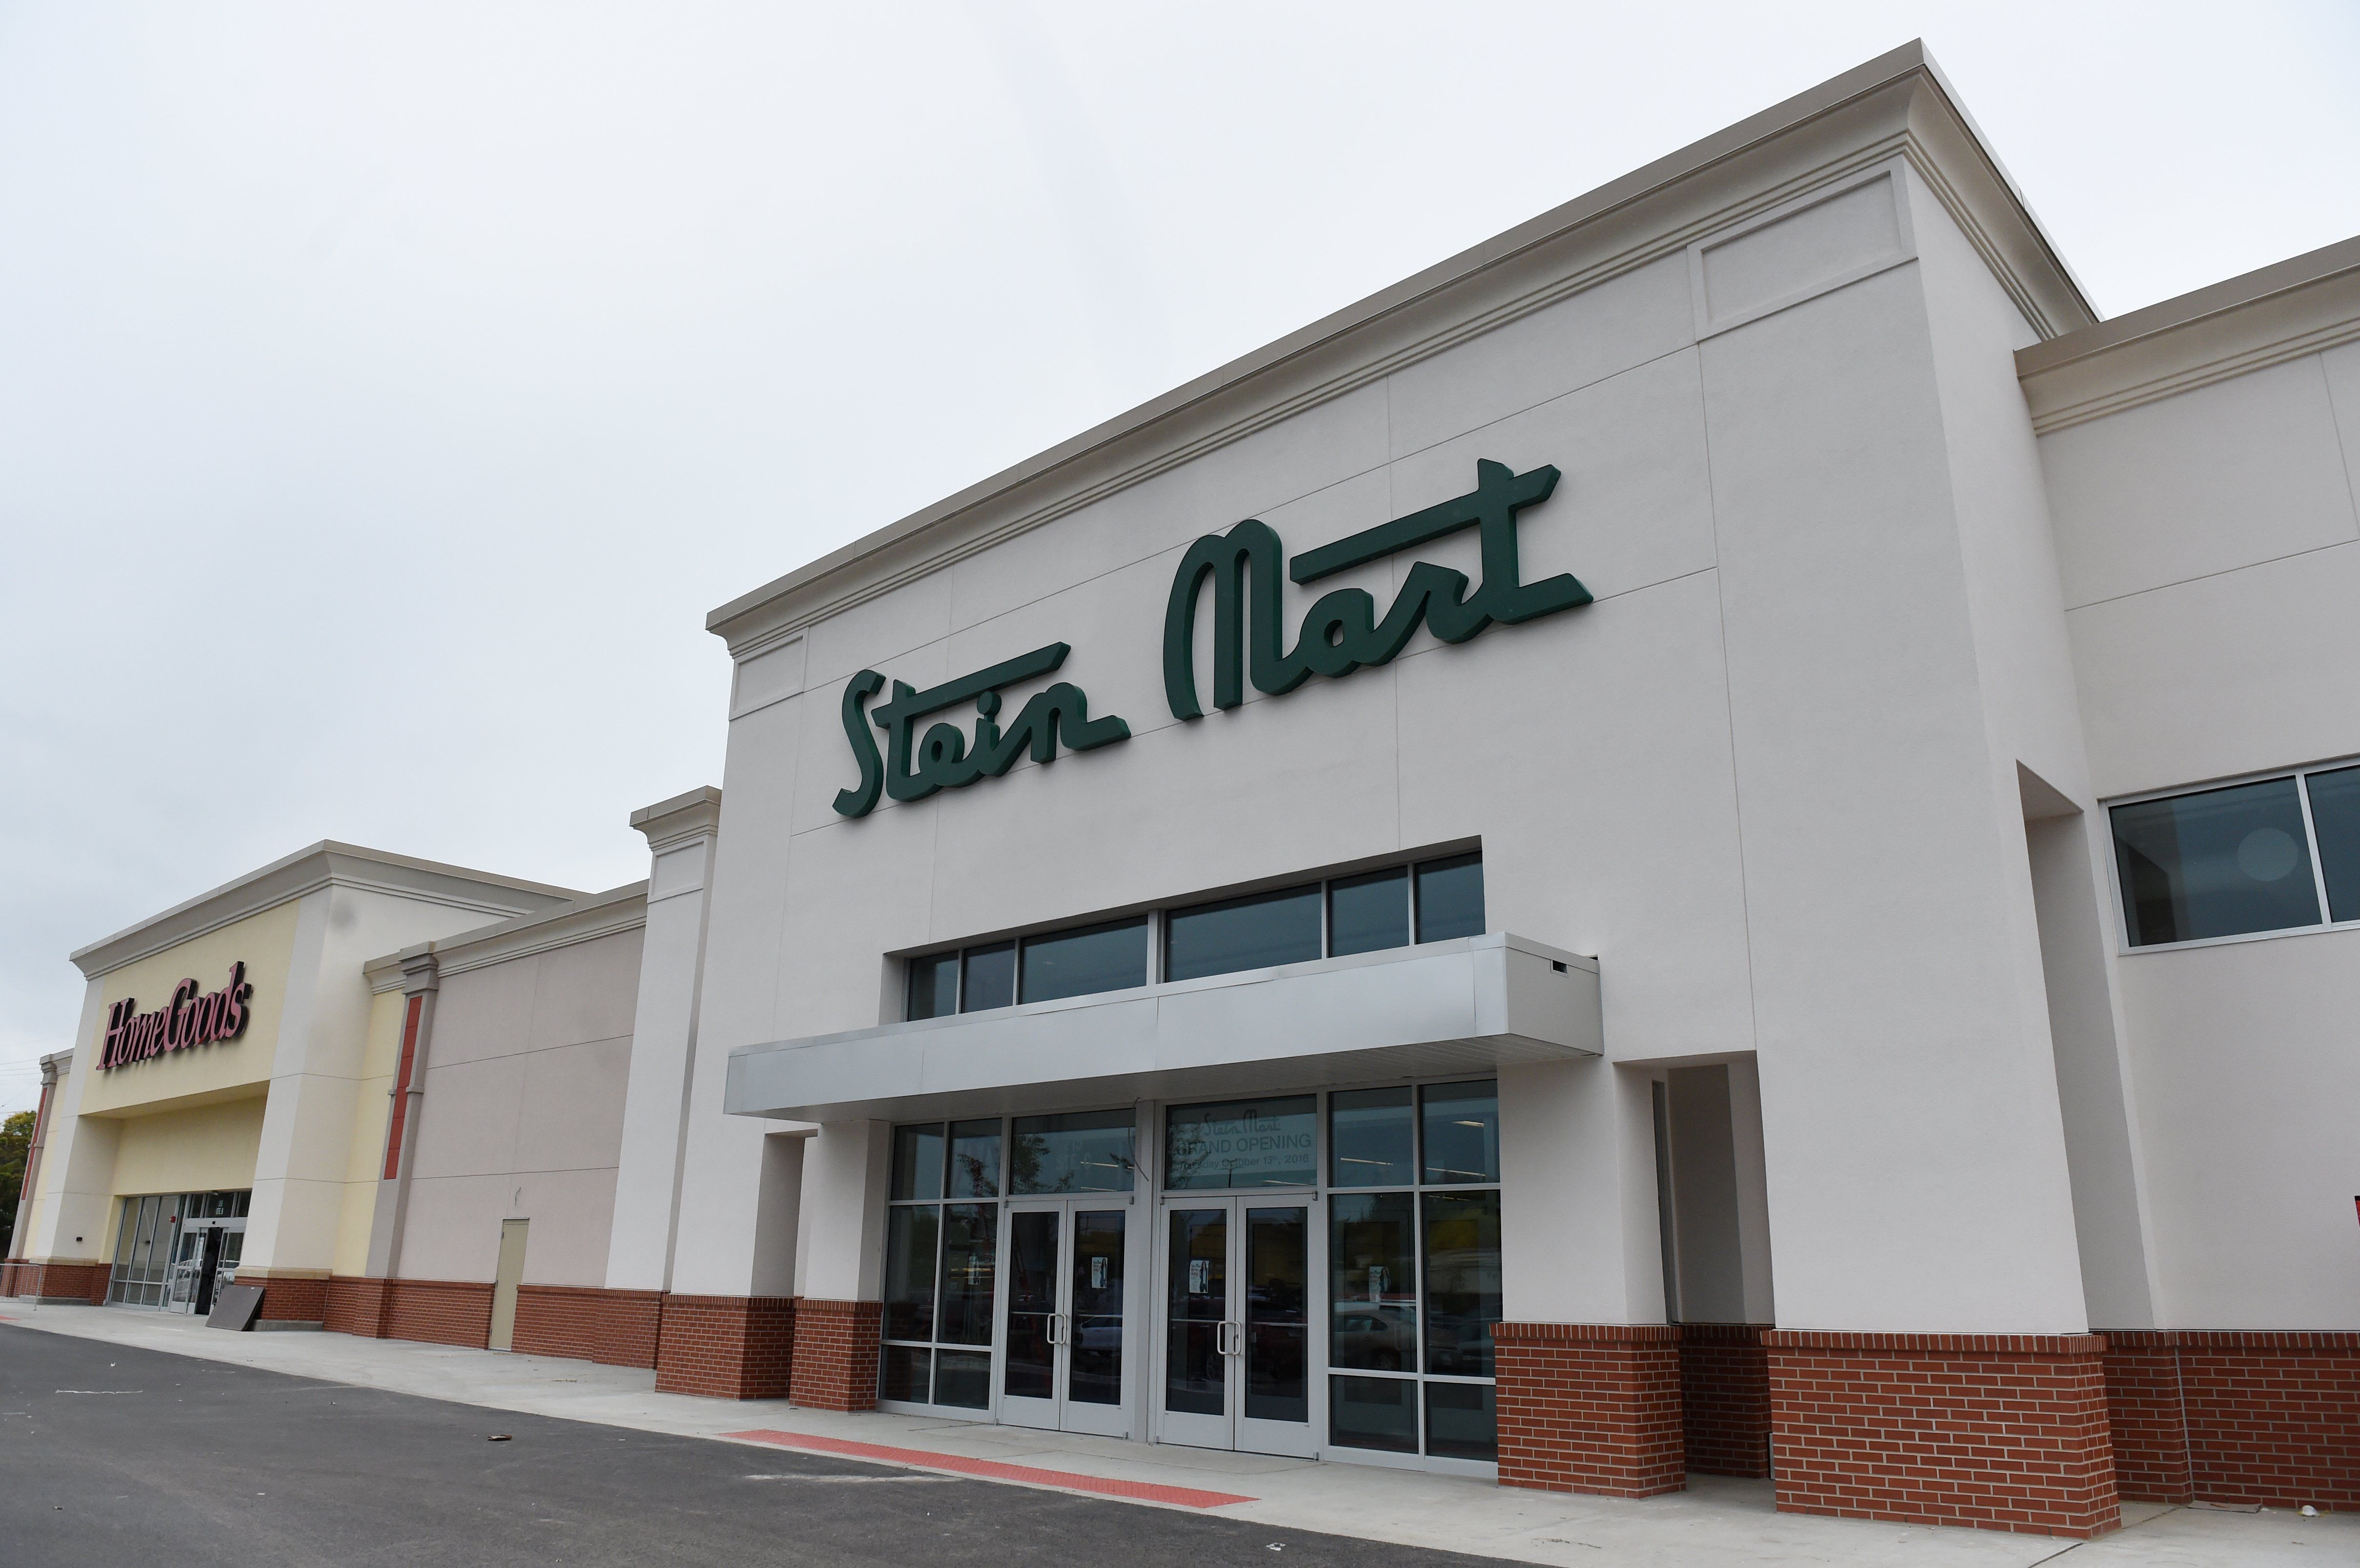 Stein Mart is being relaunched online